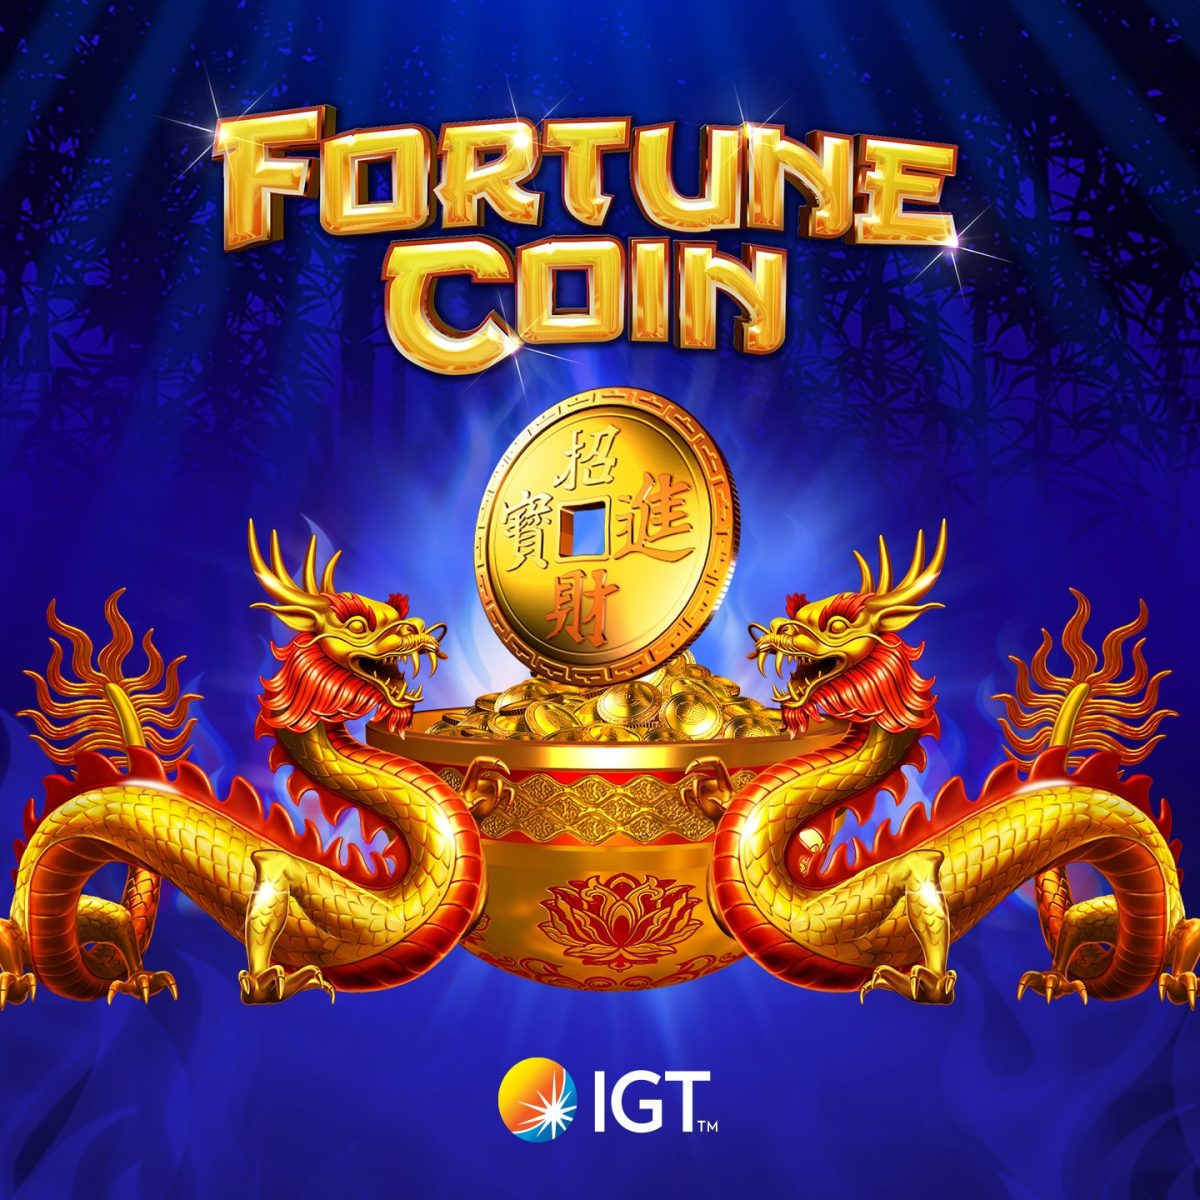 Fortune Coins at a Glance